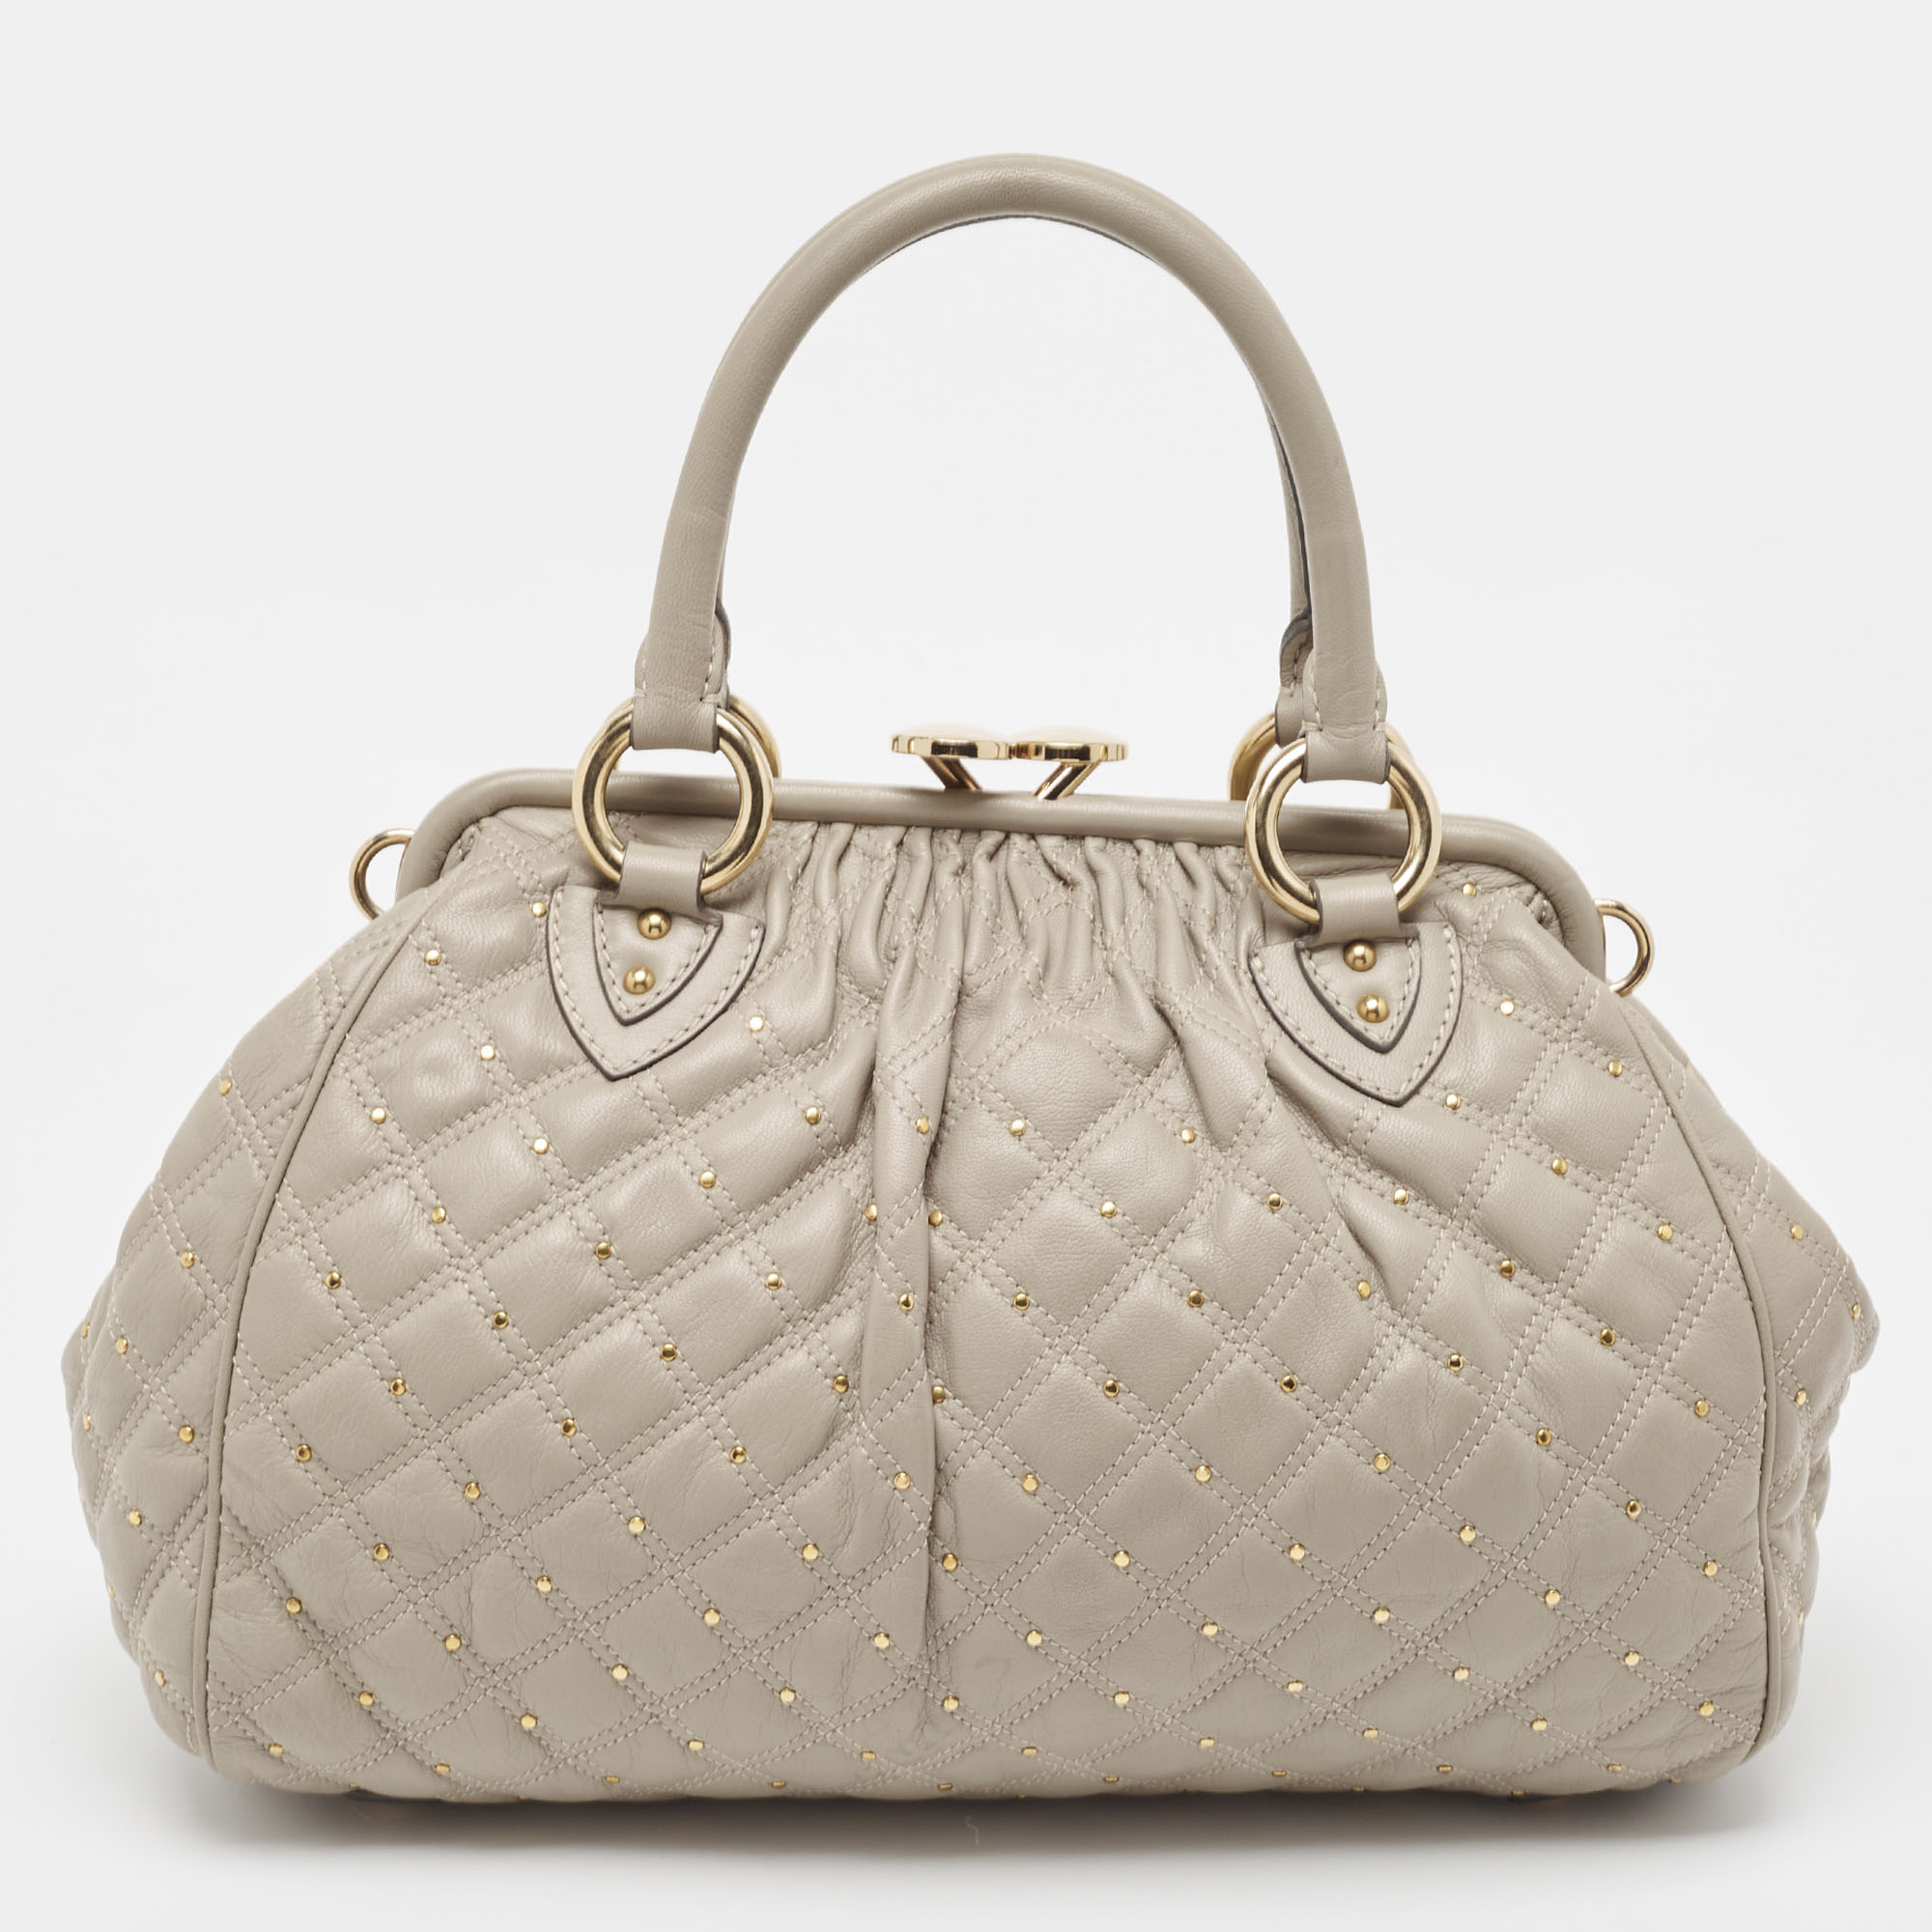 Marc Jacobs Light Beige Quilted Leather Stam Satchel